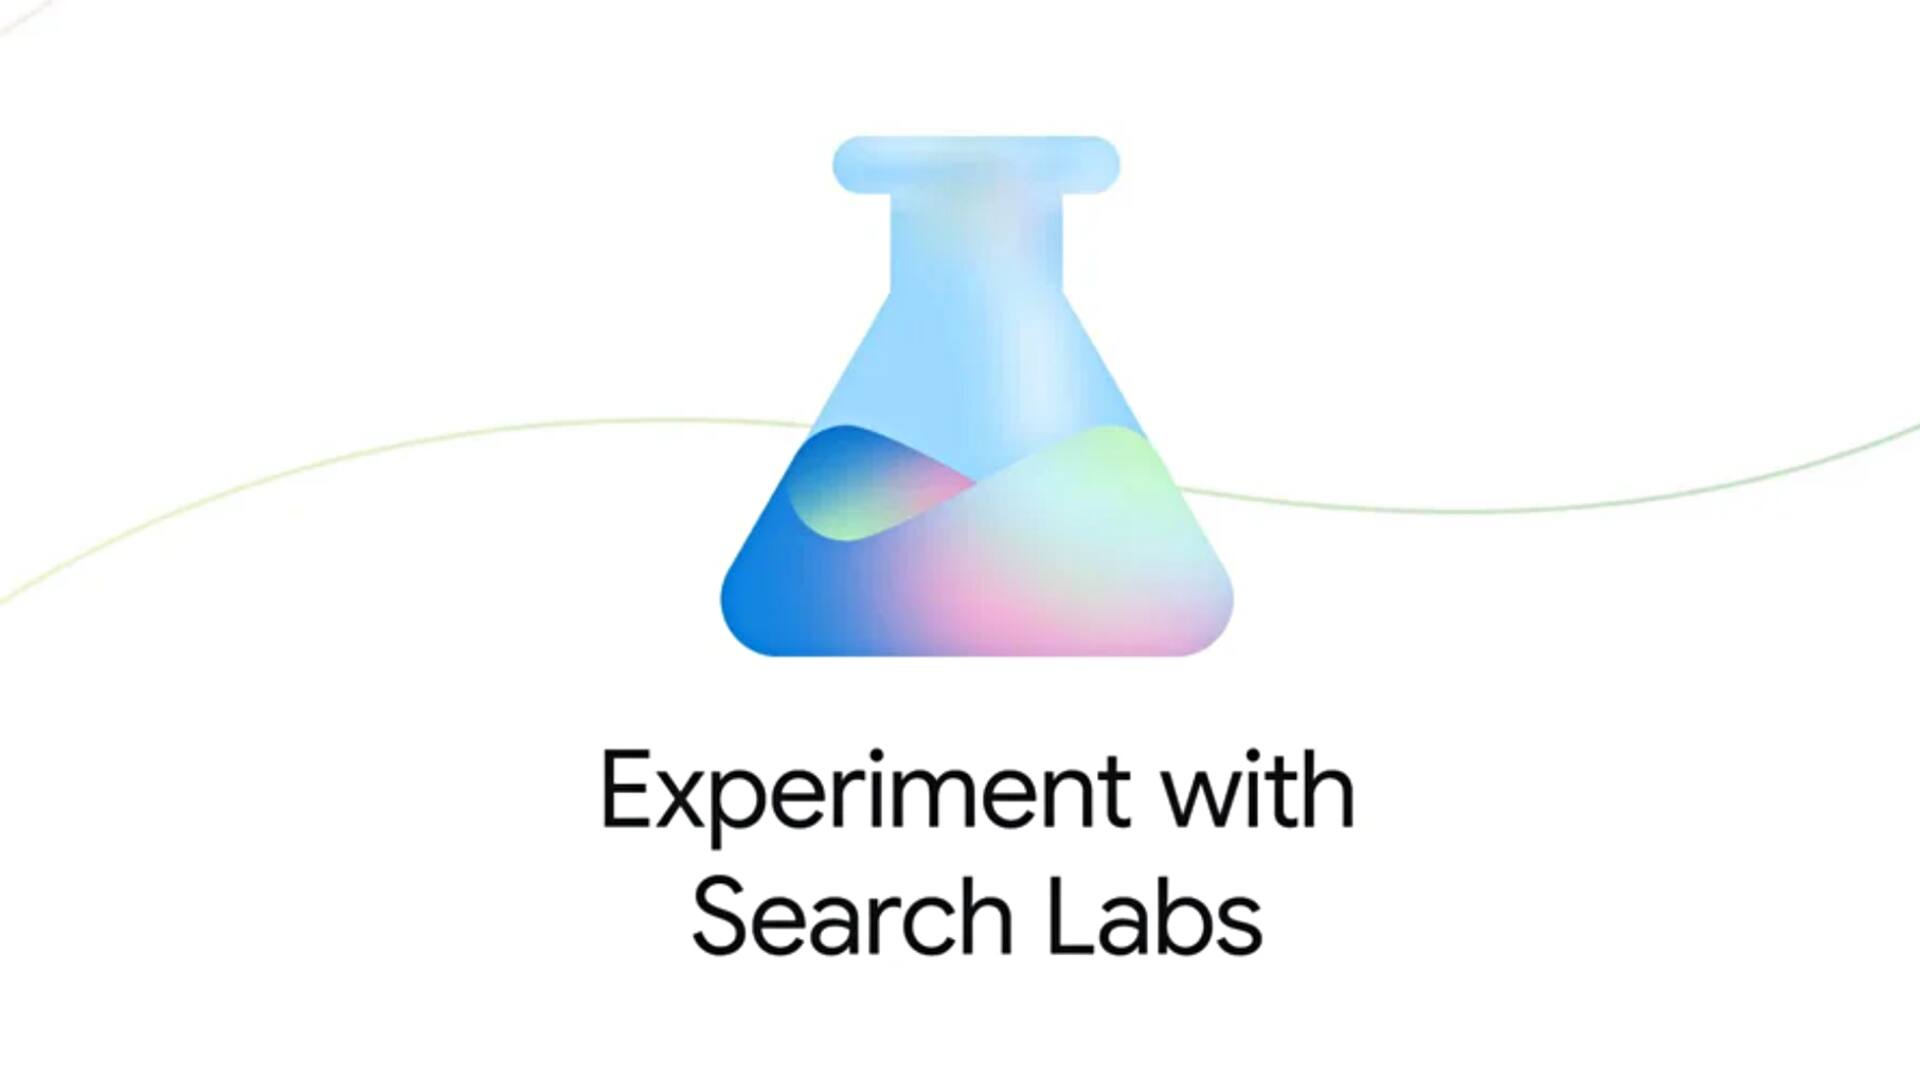 How to join Google Search Labs program